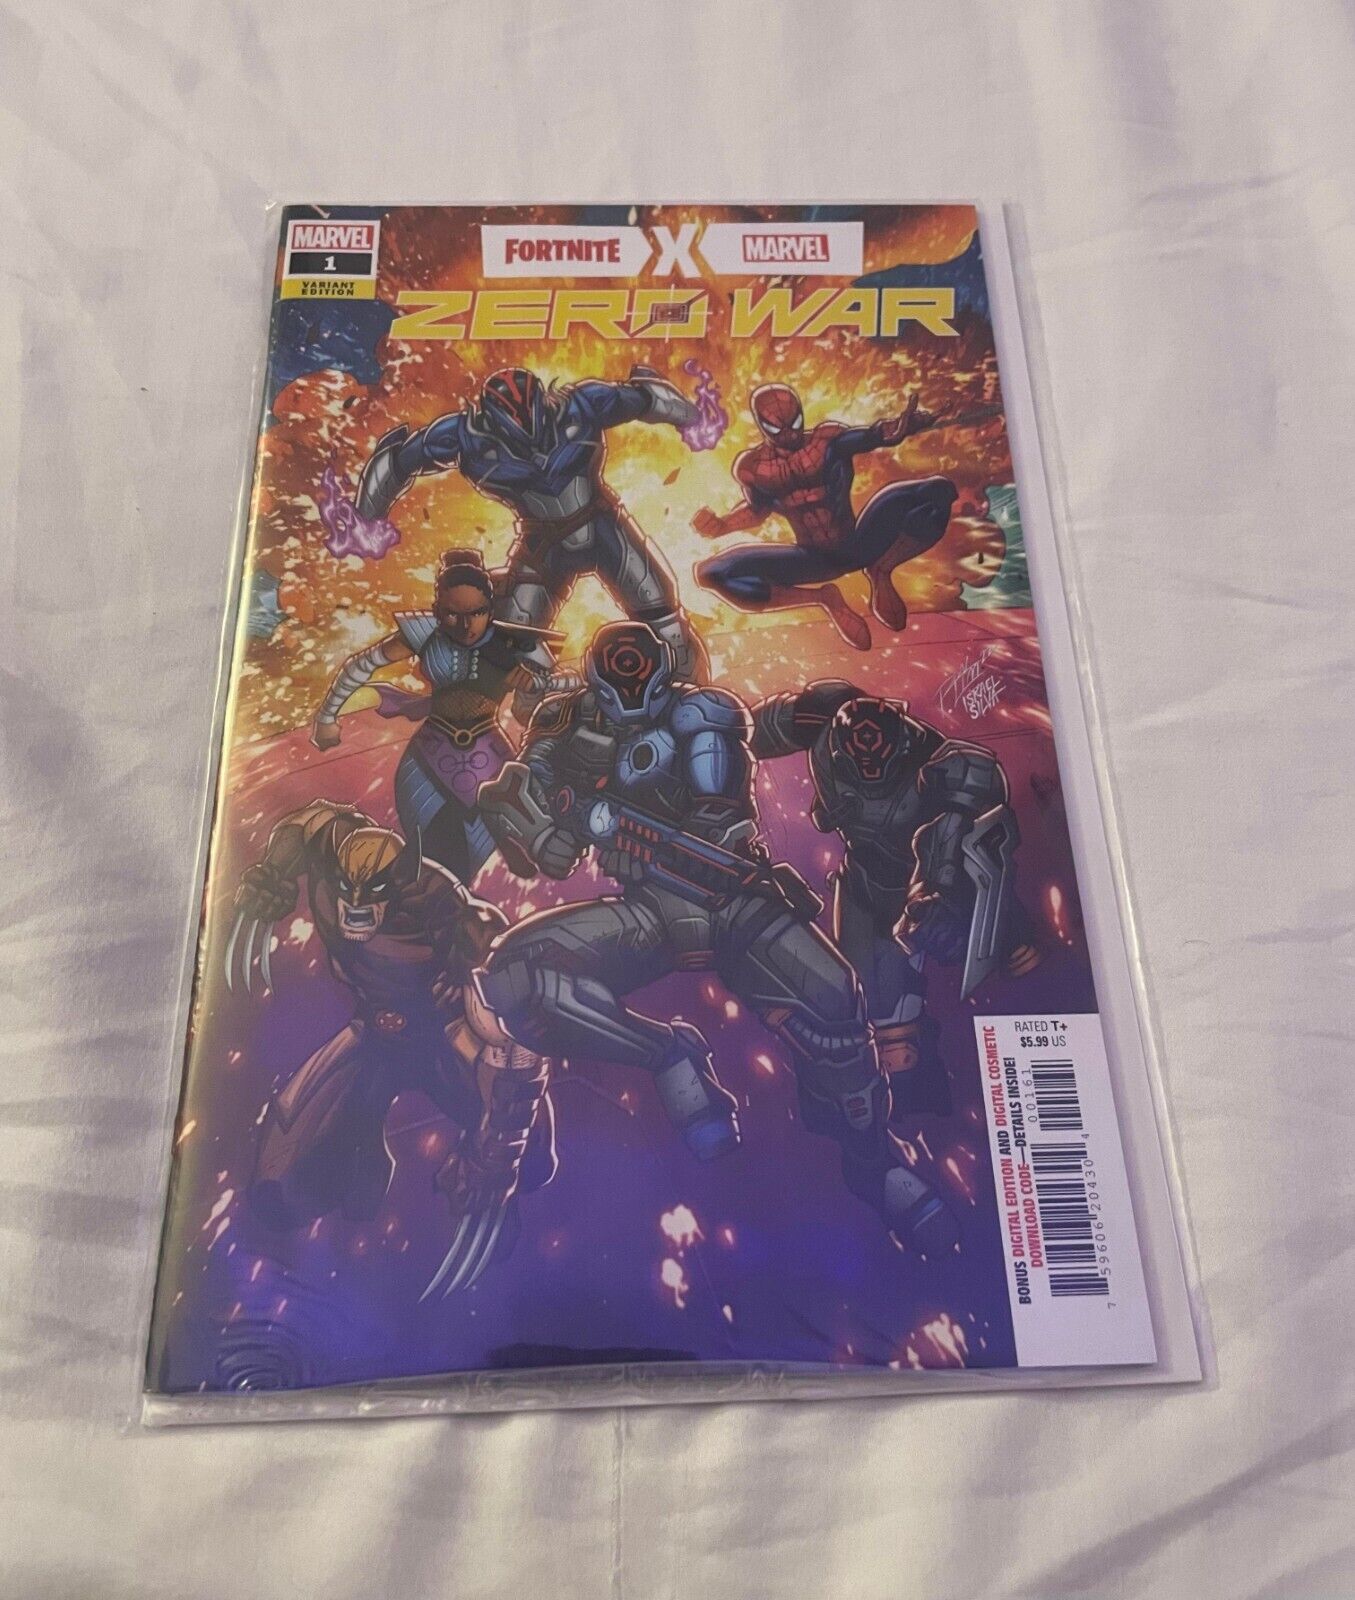 Fortnite X Marvel Zero War #1 2022 Lim Variant Comic New WITH GAME CODE